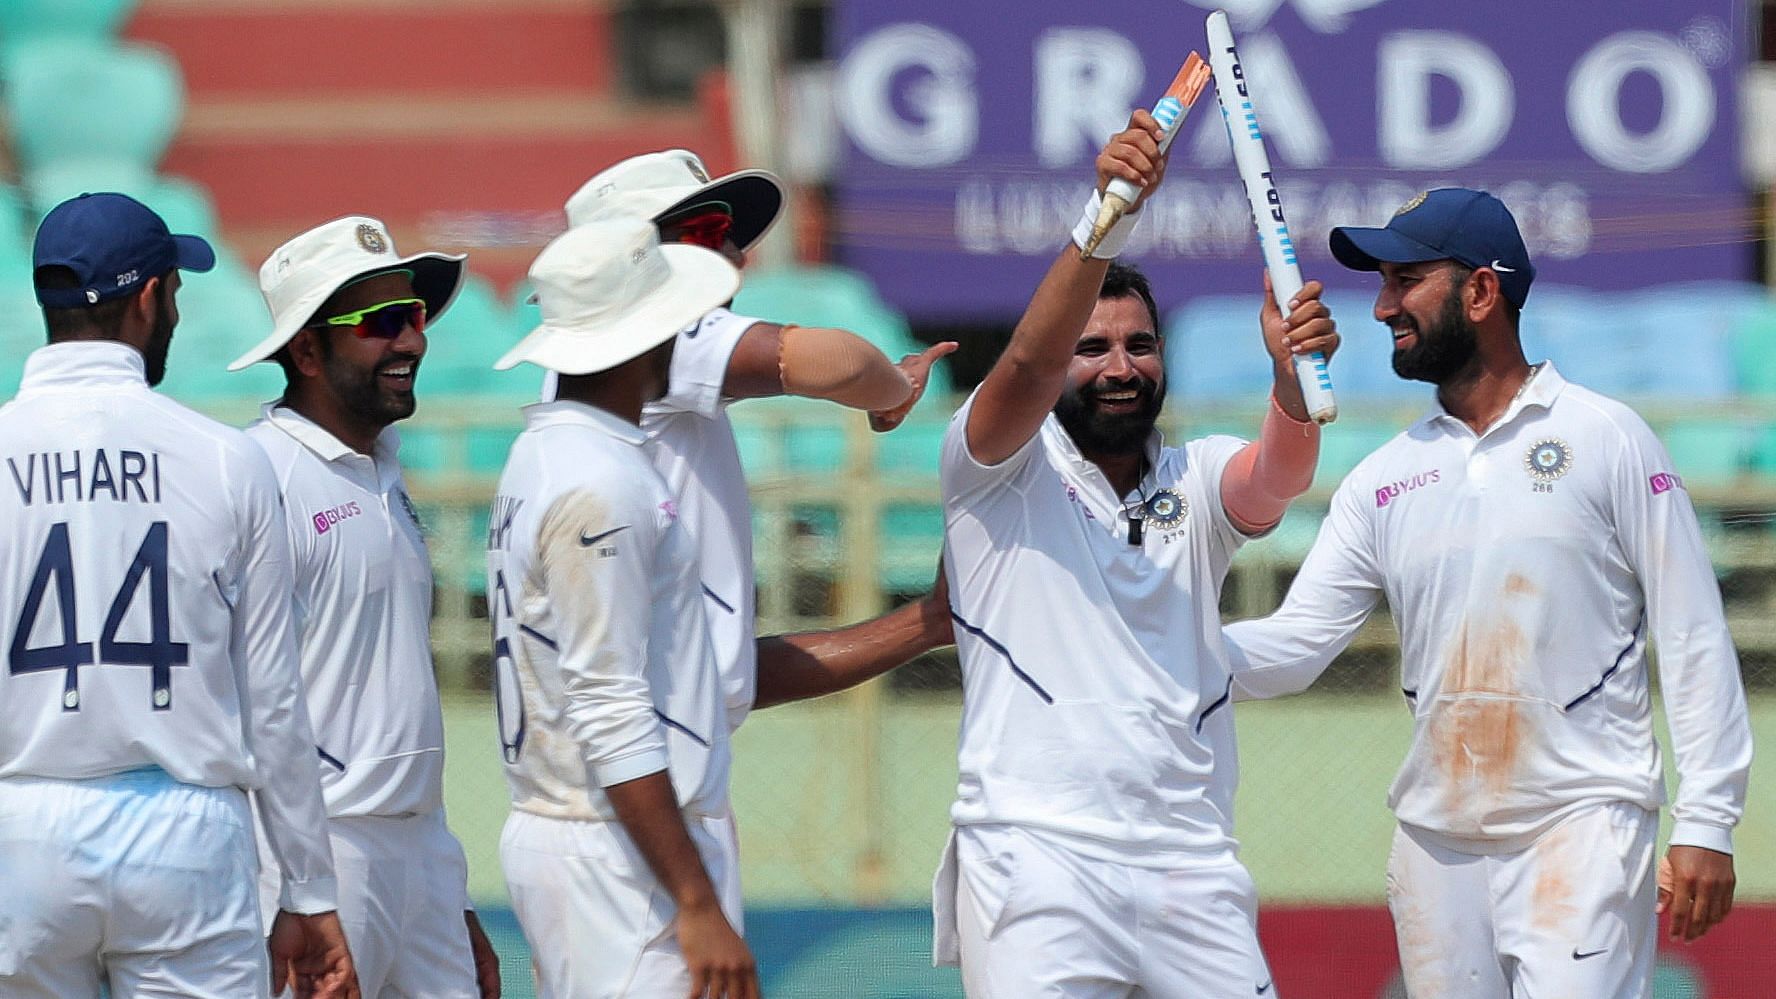 Mohammed Shami took 5-35 as India beat South Africa by 203 runs in the first Test on Sunday.